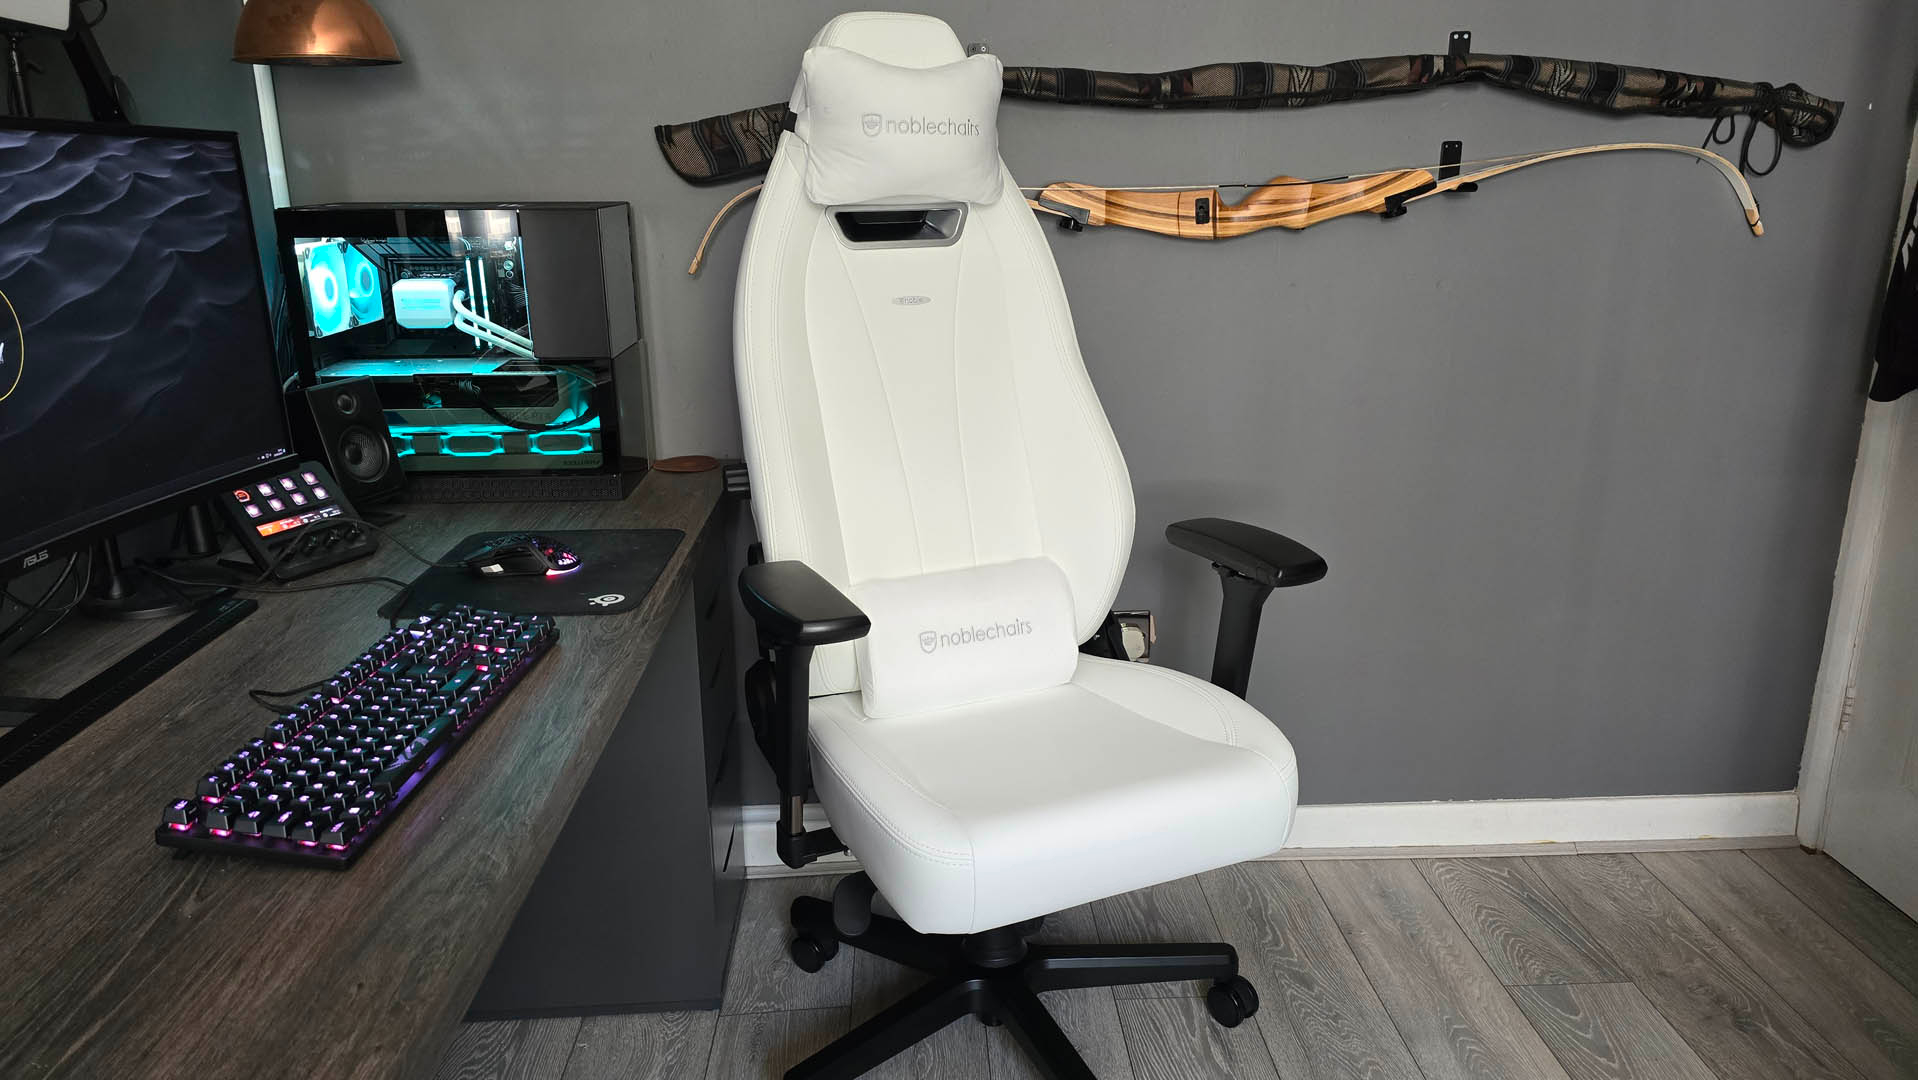 The Noblechairs Legend gaming chair on a wooden floor in front of a grey wall